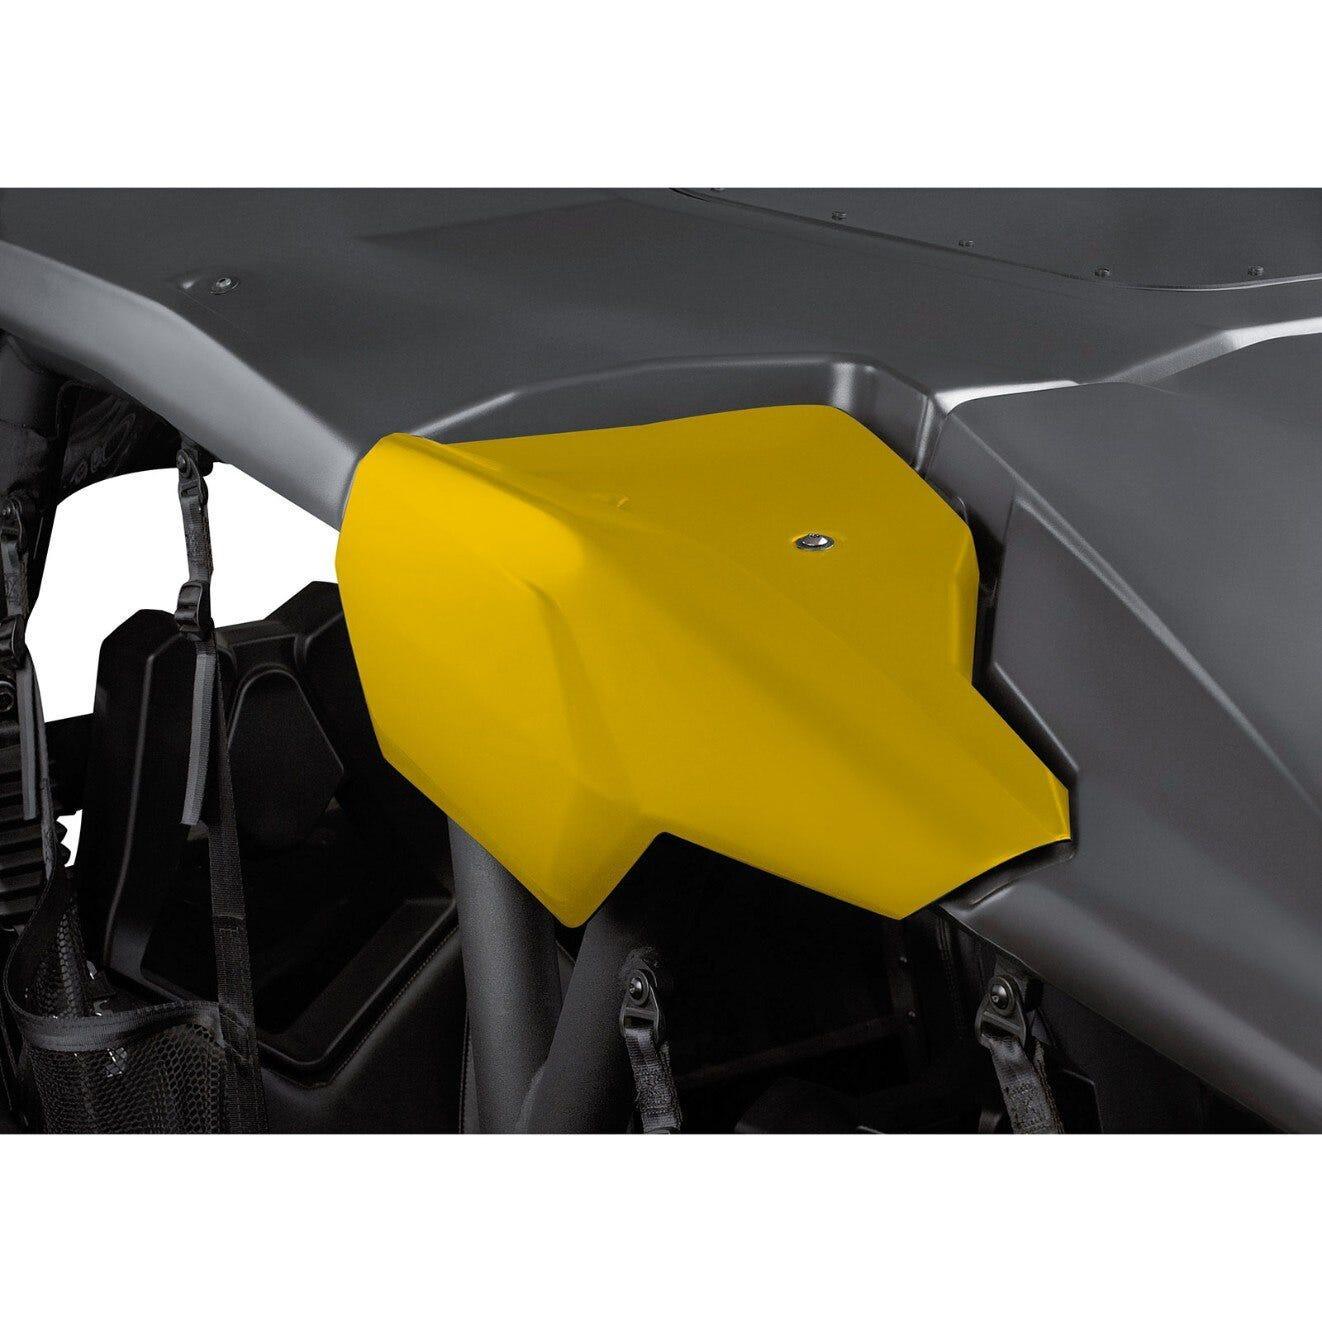 Shop Can-Am SXS Covers & Accessories at Factory Recreation